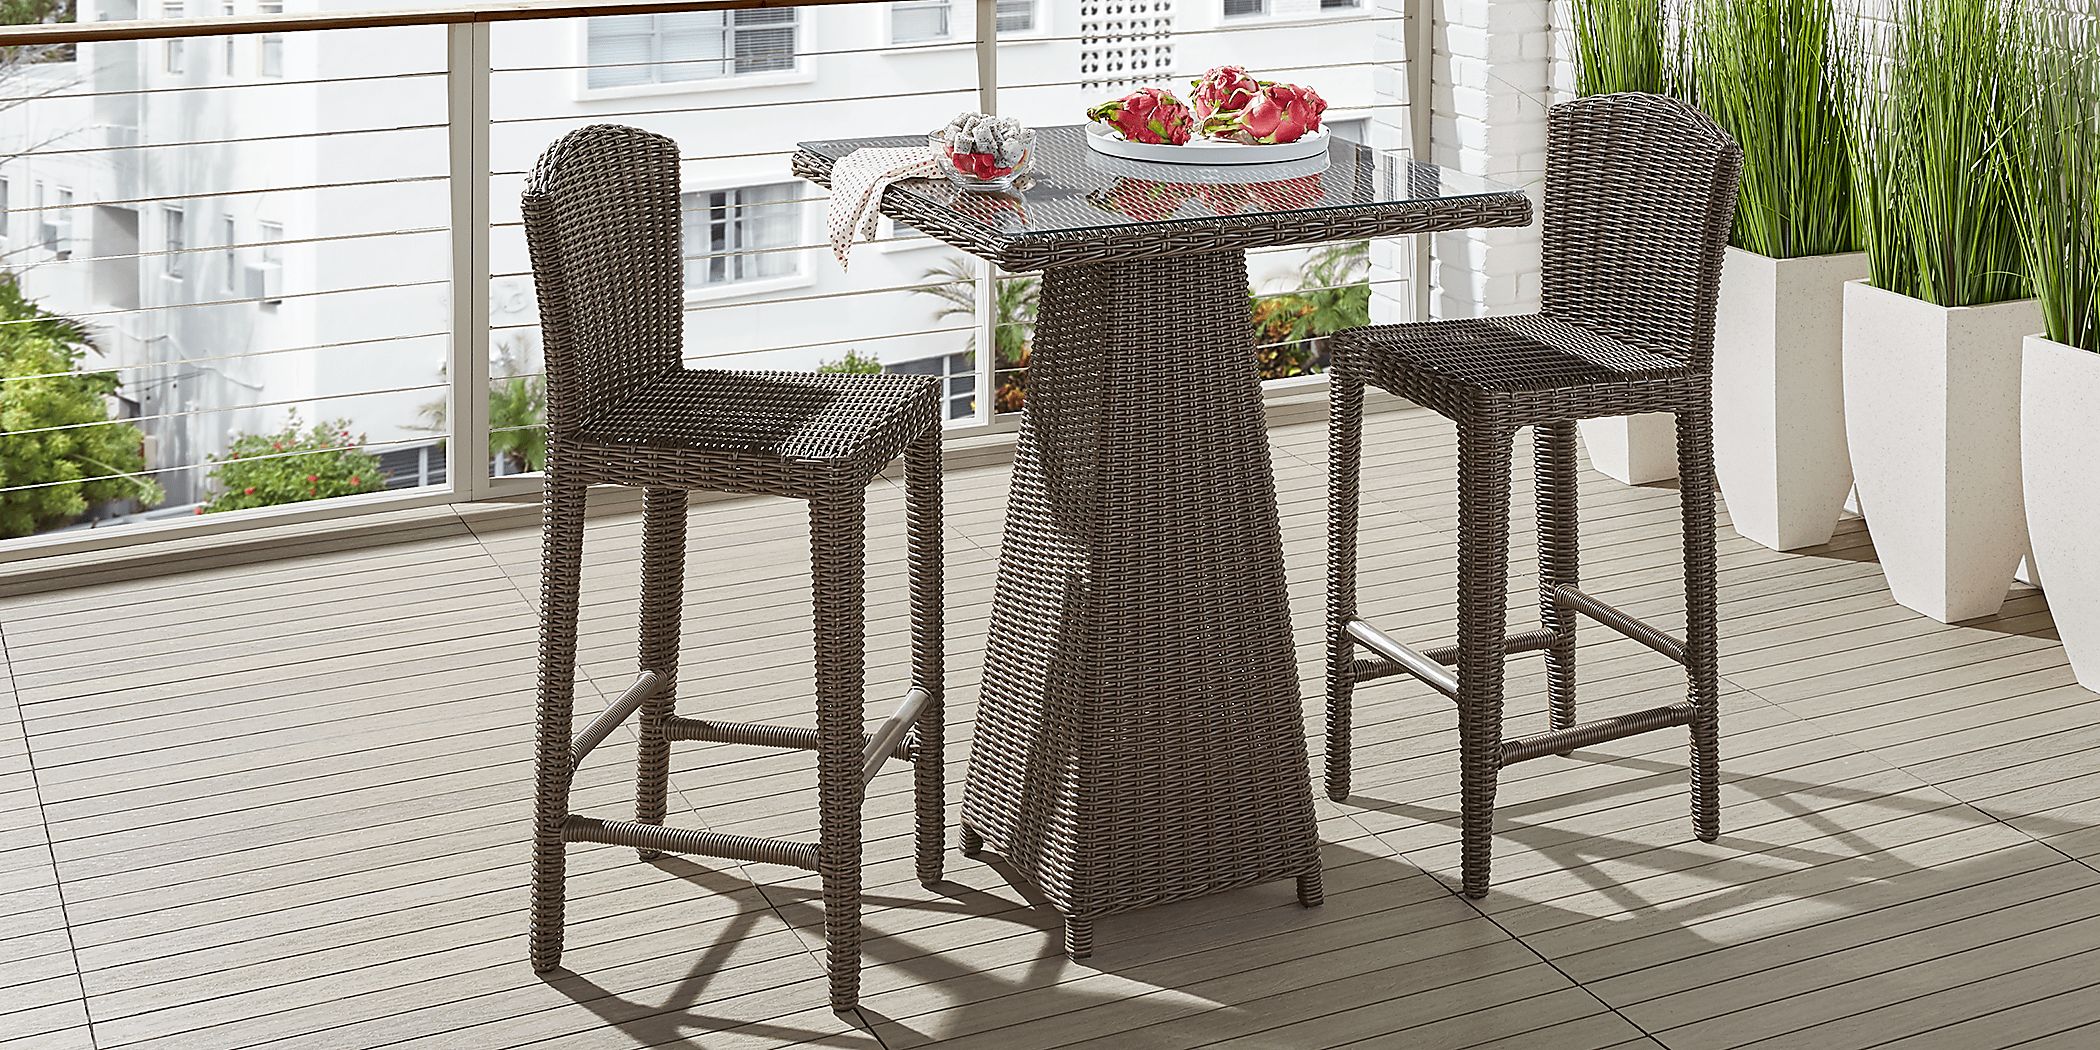 Patmos Brown Wicker 3 Pc 32 in. Square Bar Height Outdoor Dining Set